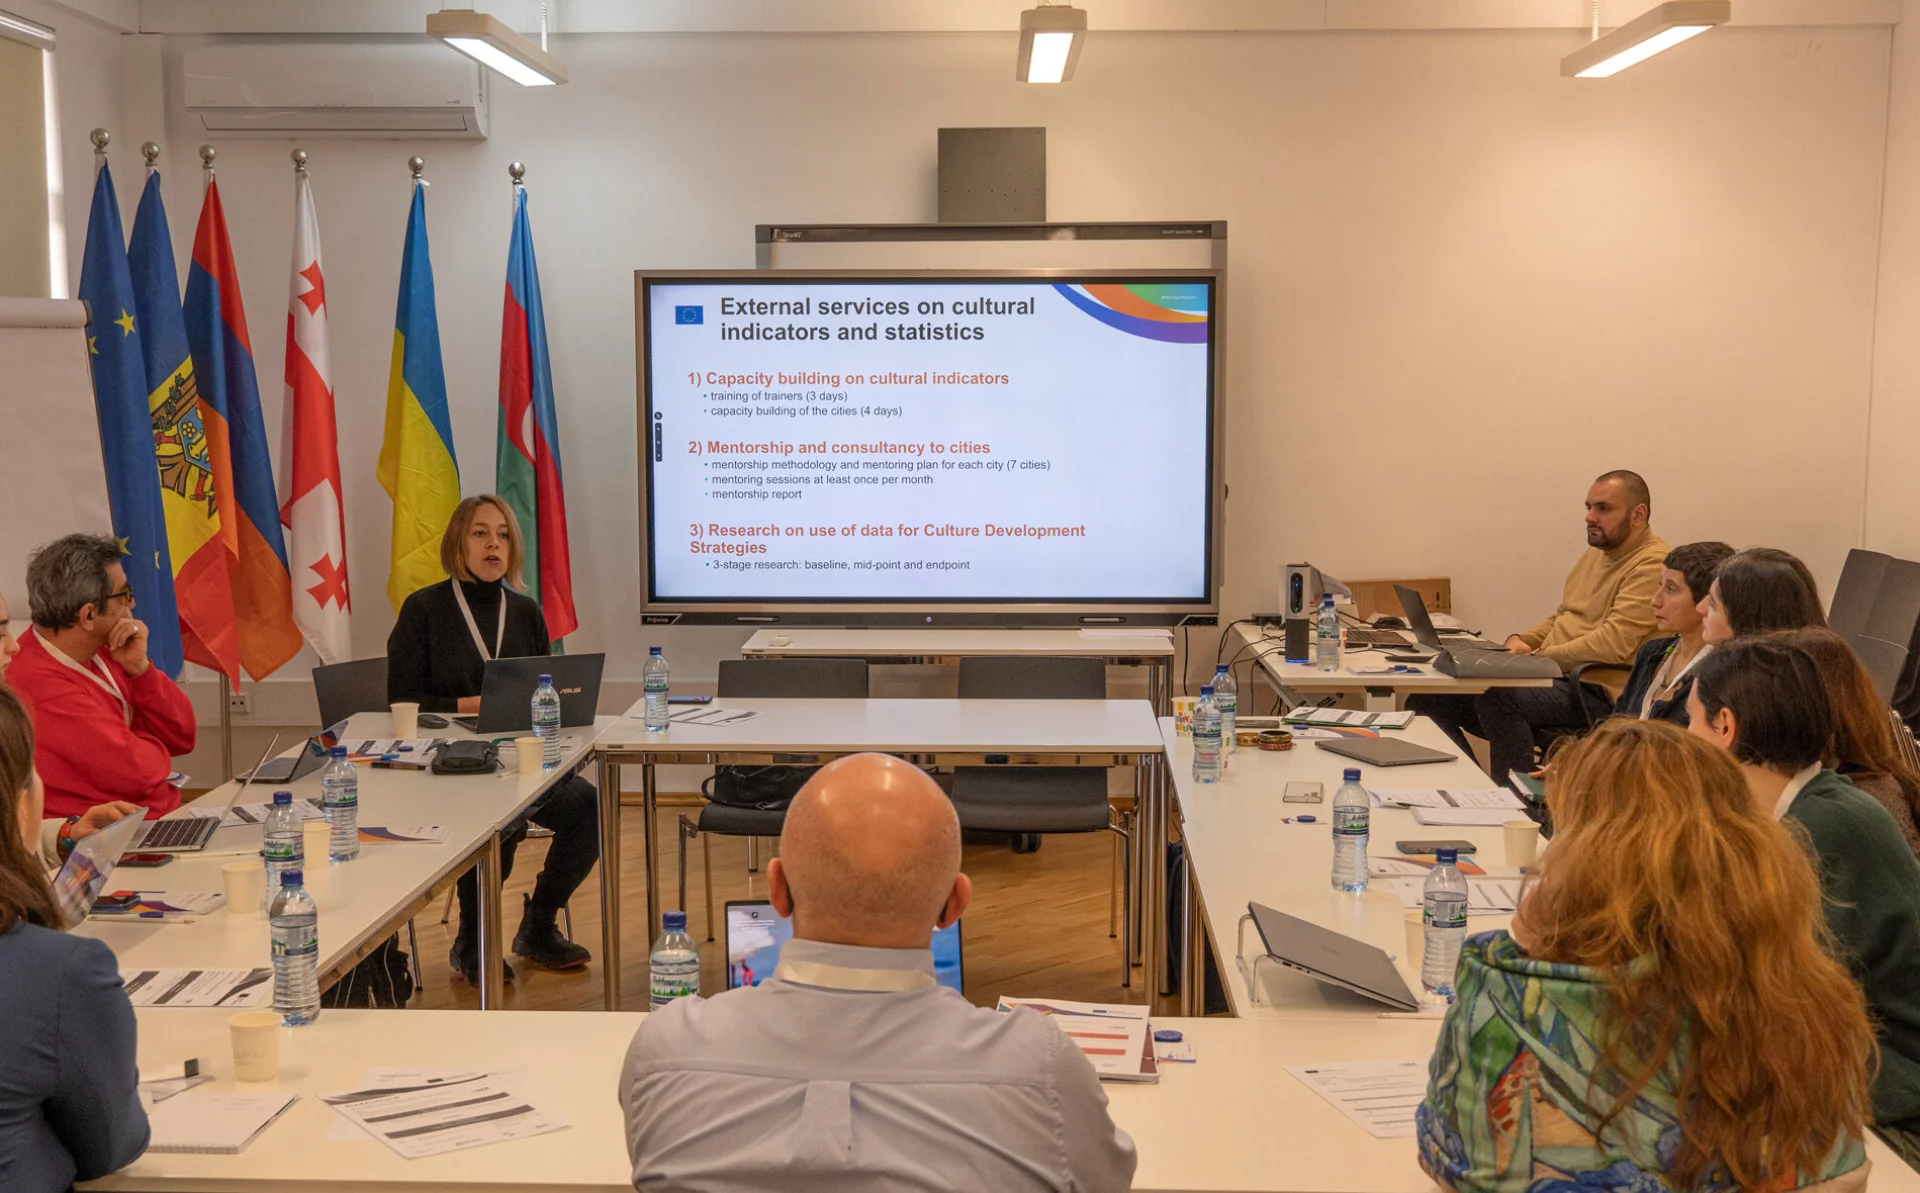 EU4Culture trains trainers for impact assessment of cultural activities in Eastern Partner countries